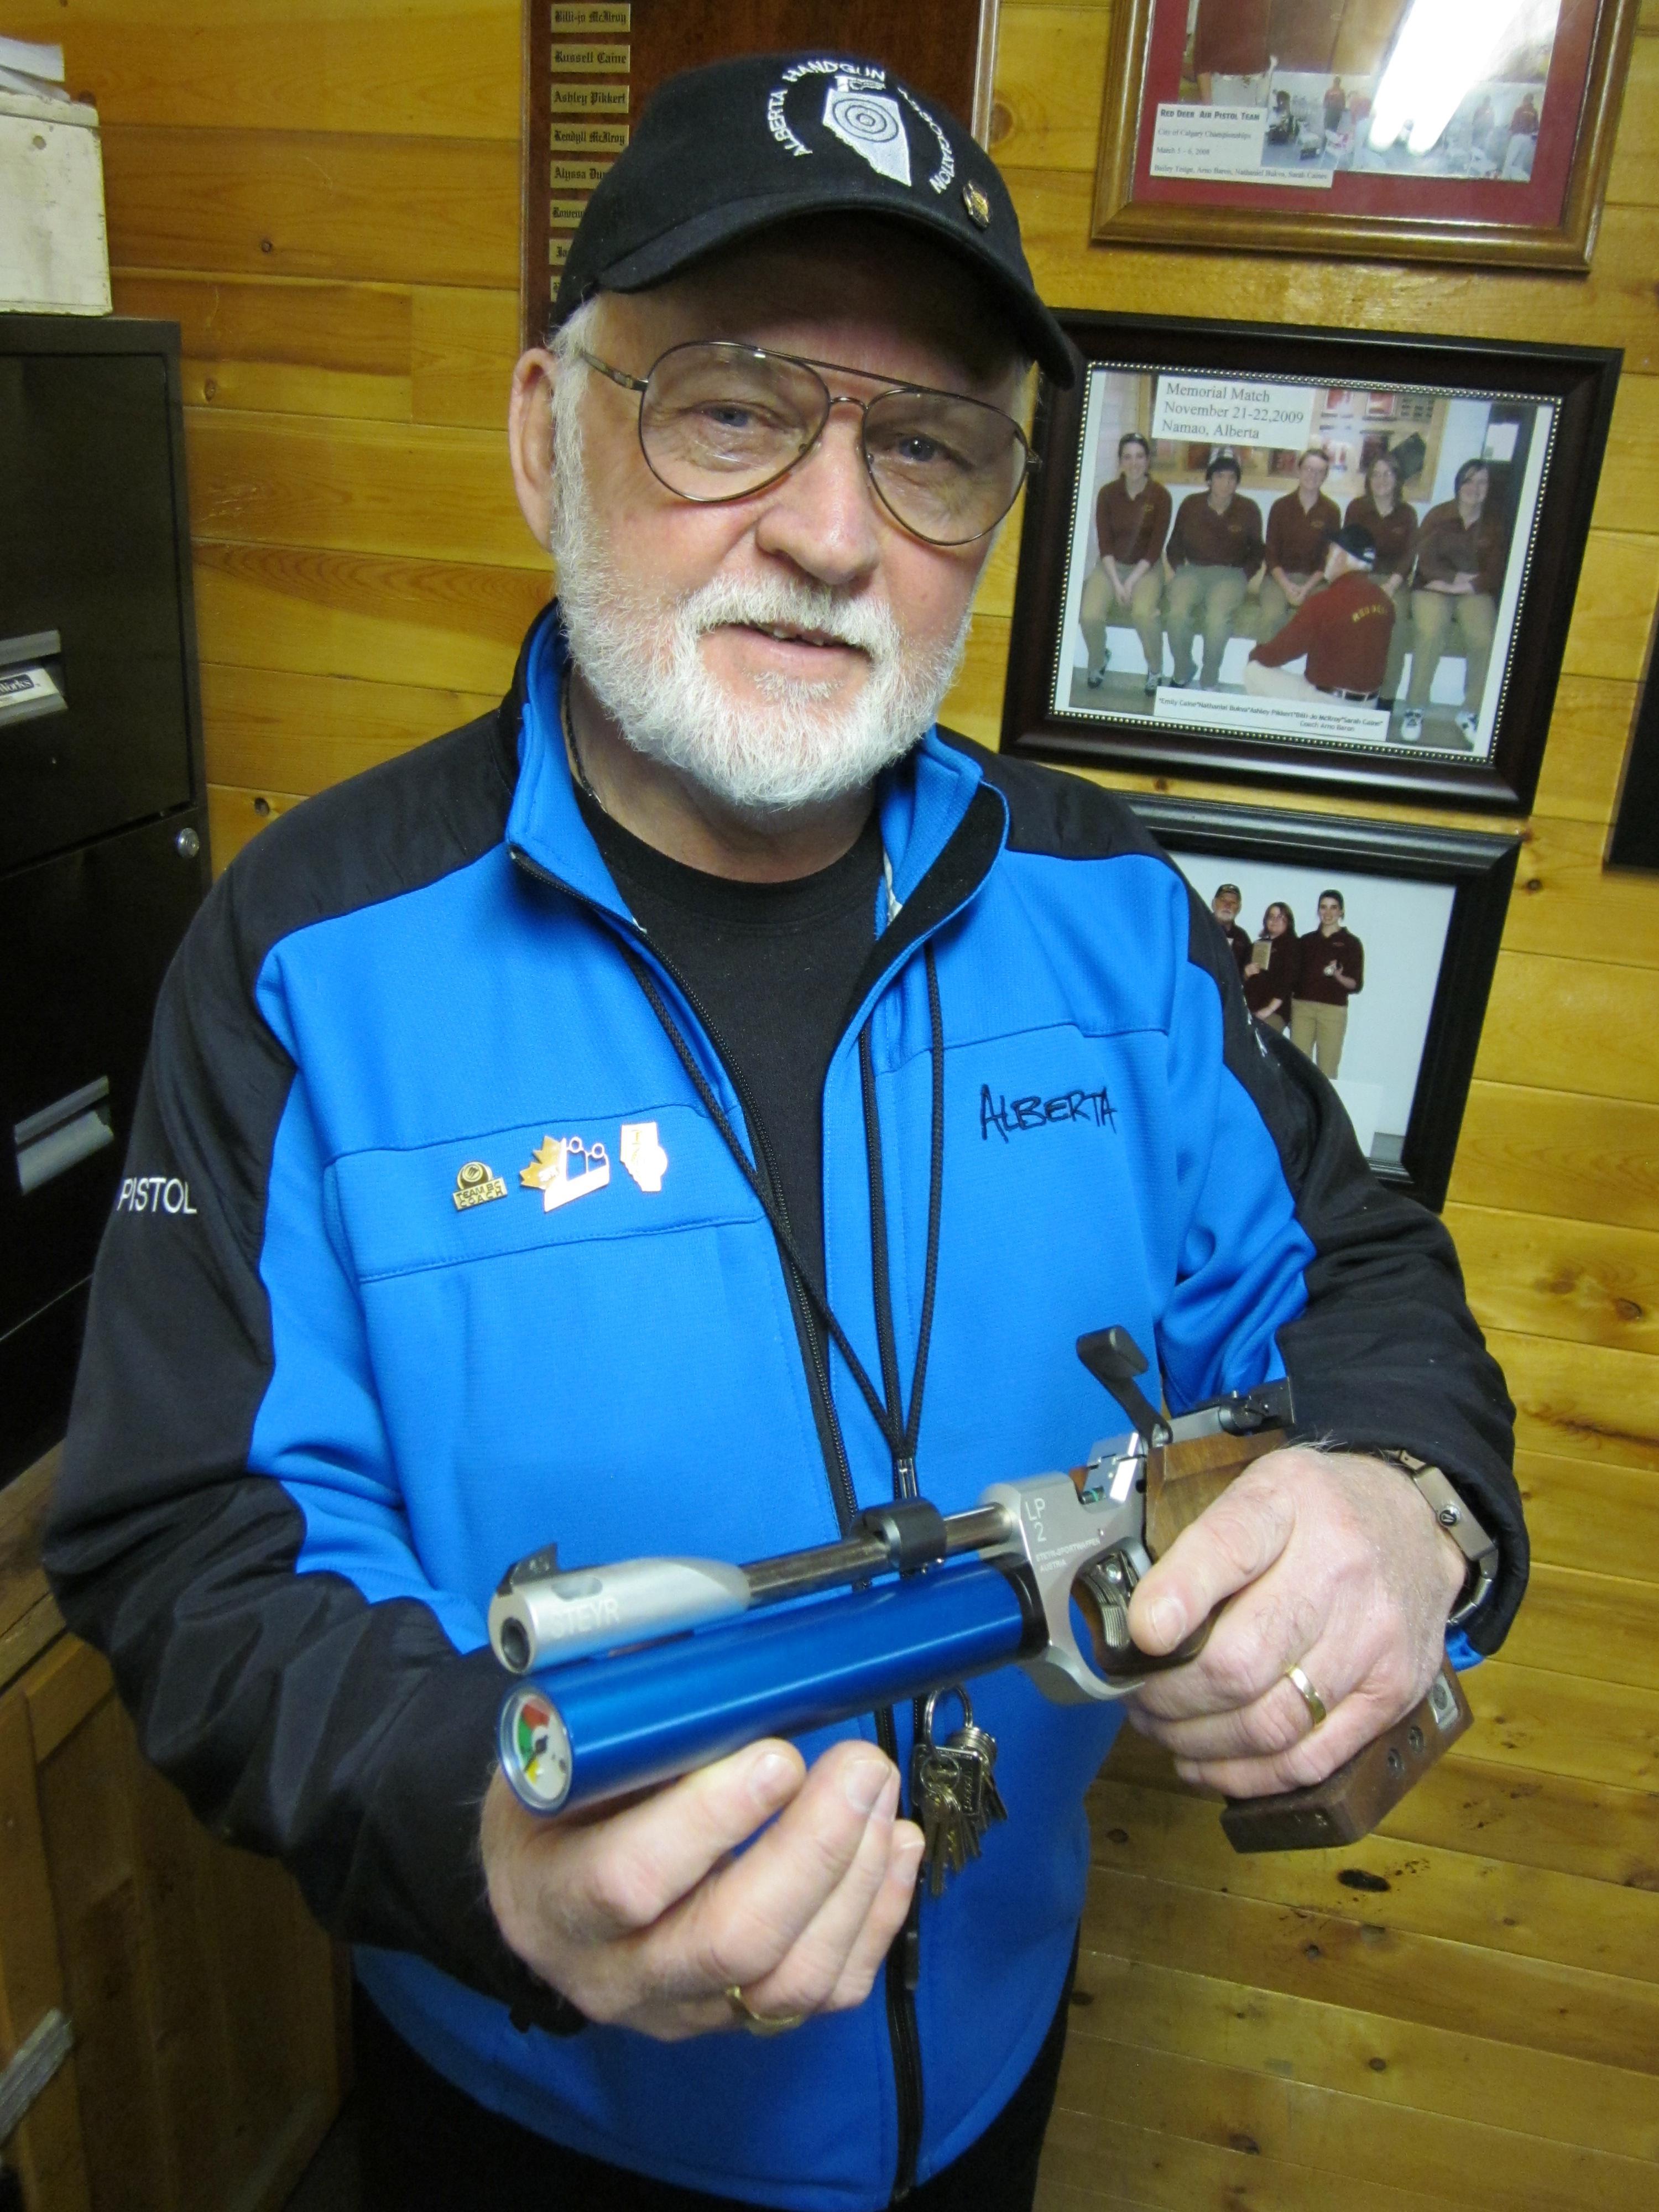 SHARING SKILLS- Sylvan Lake resident Arno Baron coaches the Red Deer Fish and Game Association Junior Air Pistol Club. The group meets Tuesday afternoons in the back of the Red Deer Public School District maintenance building located beside the Memorial Centre.